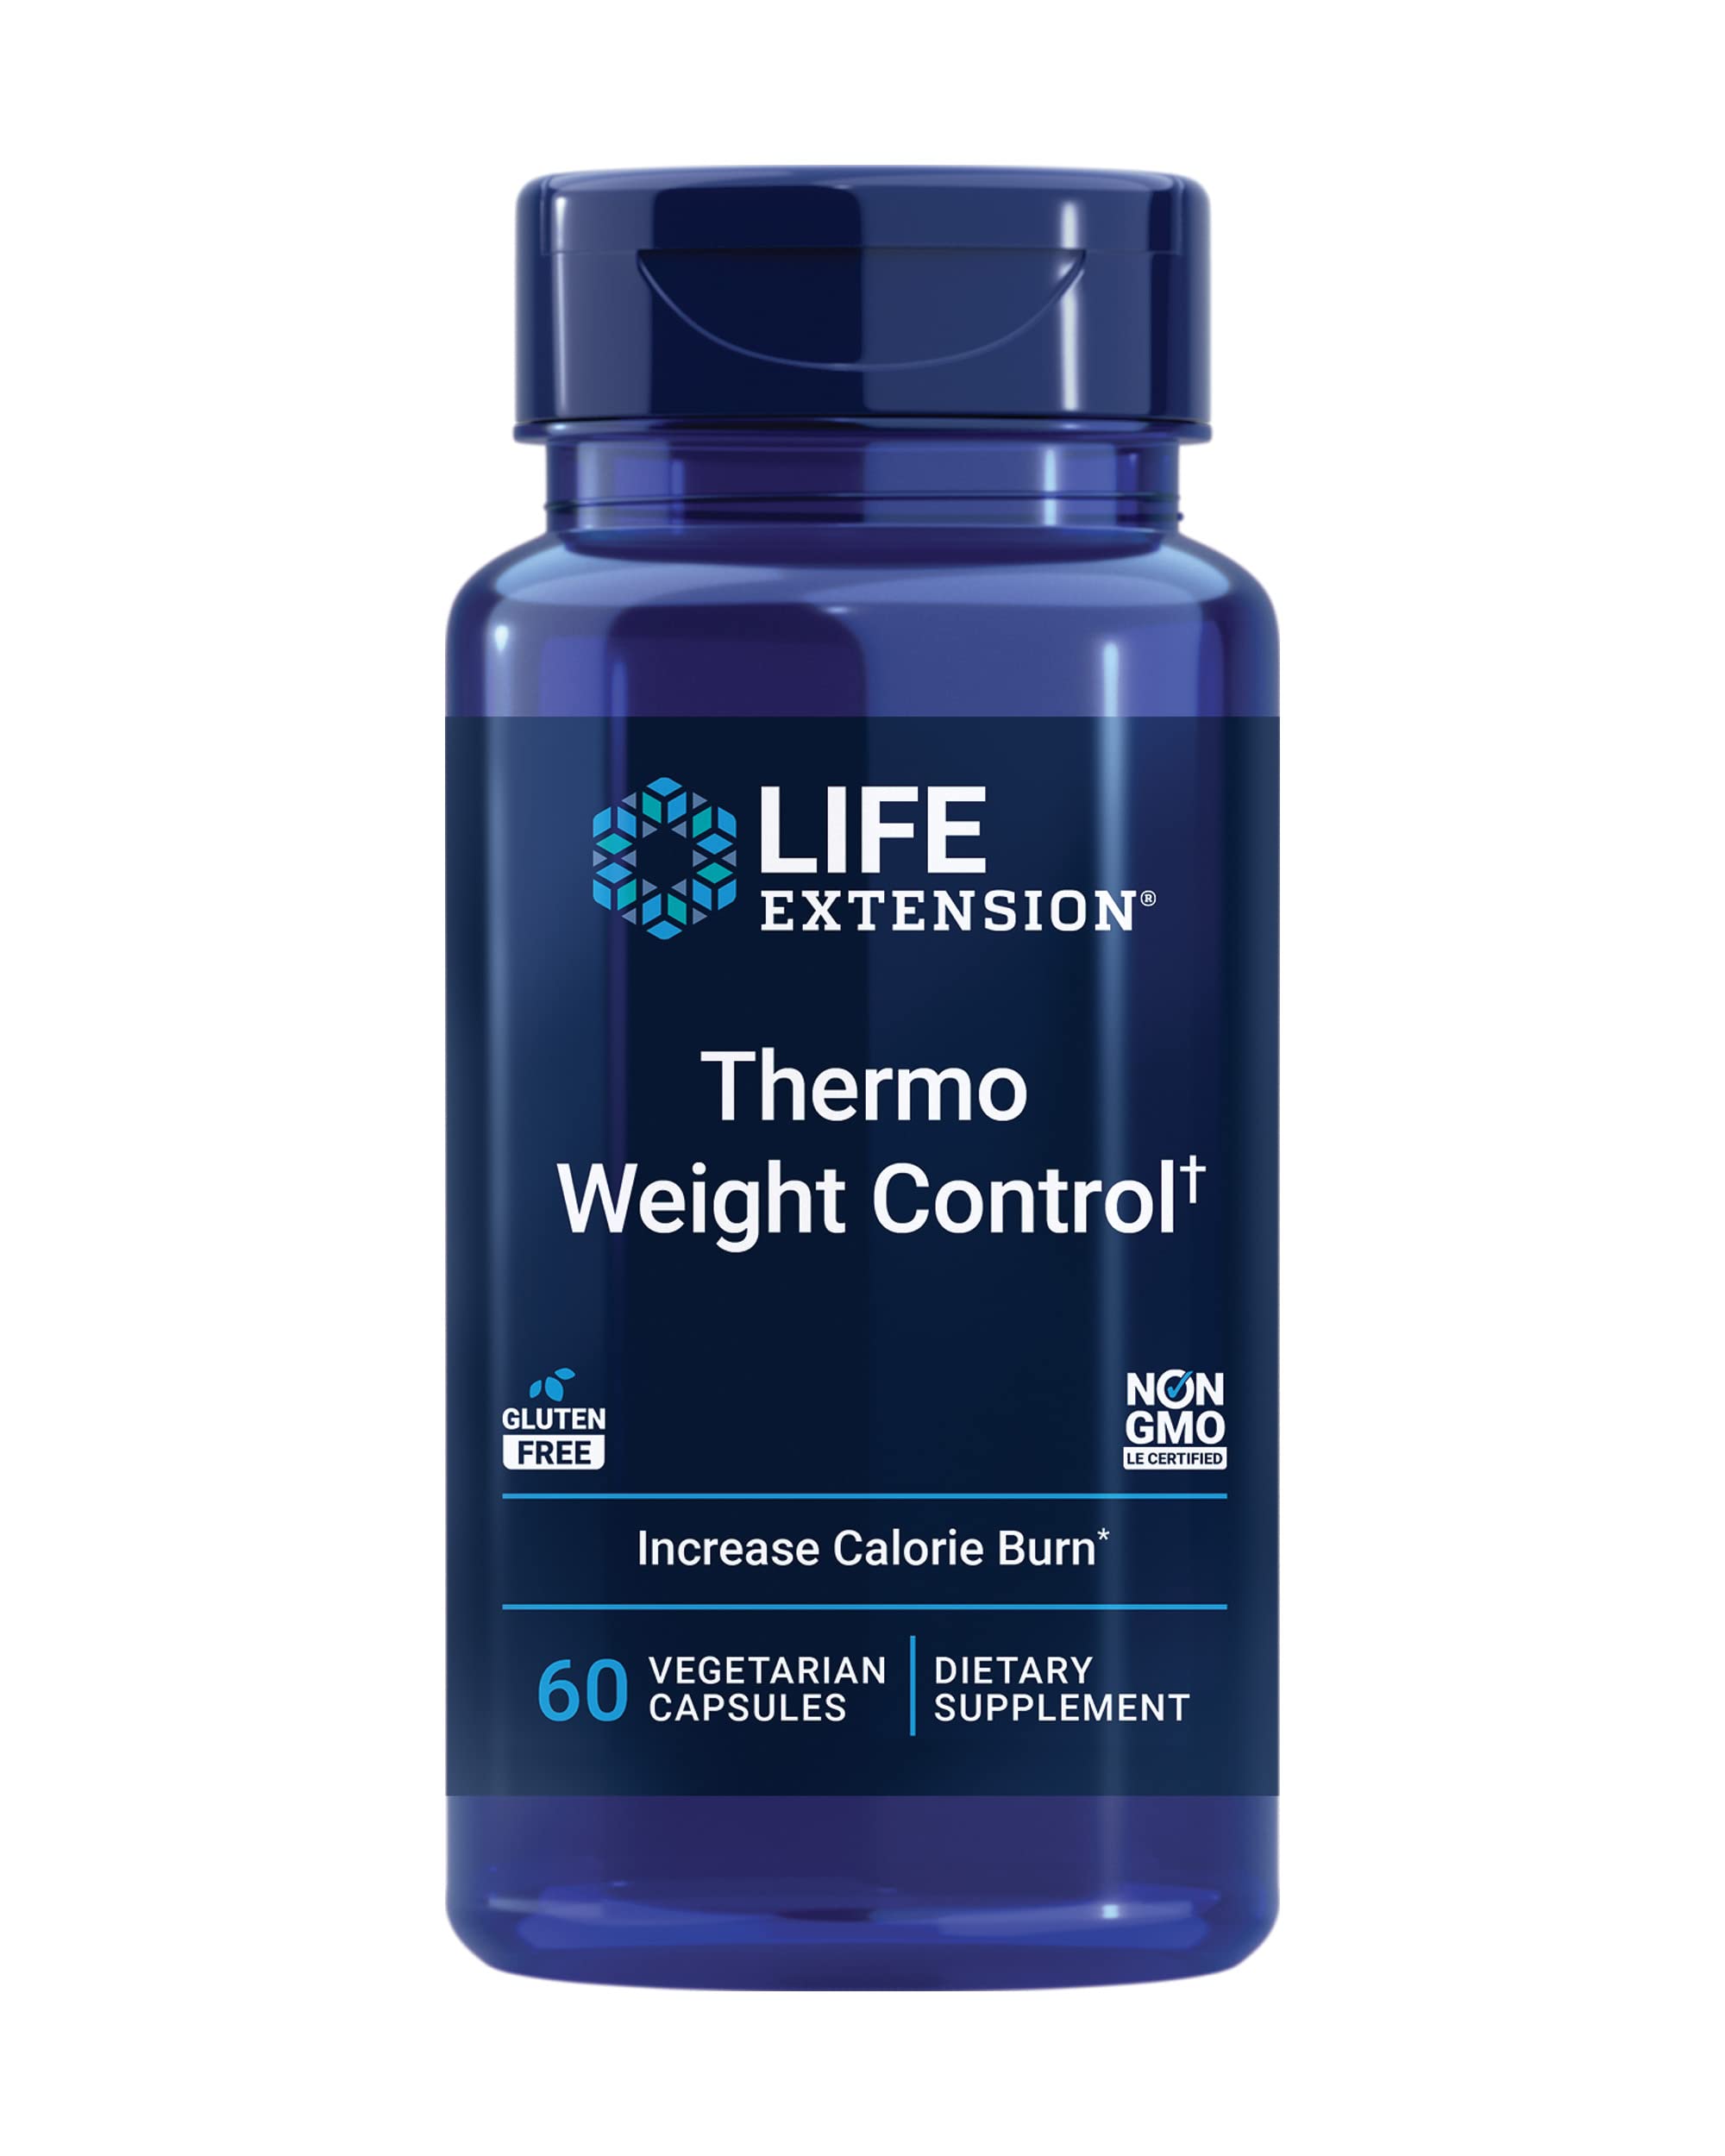 Life Extension Thermo Weight Control – Encourages Fat Burning, Healthy Weight Loss & Thermogenesis – Patented Capsaicin Extract – Weight Management – Gluten-Free – 60 Vegetarian Capsules